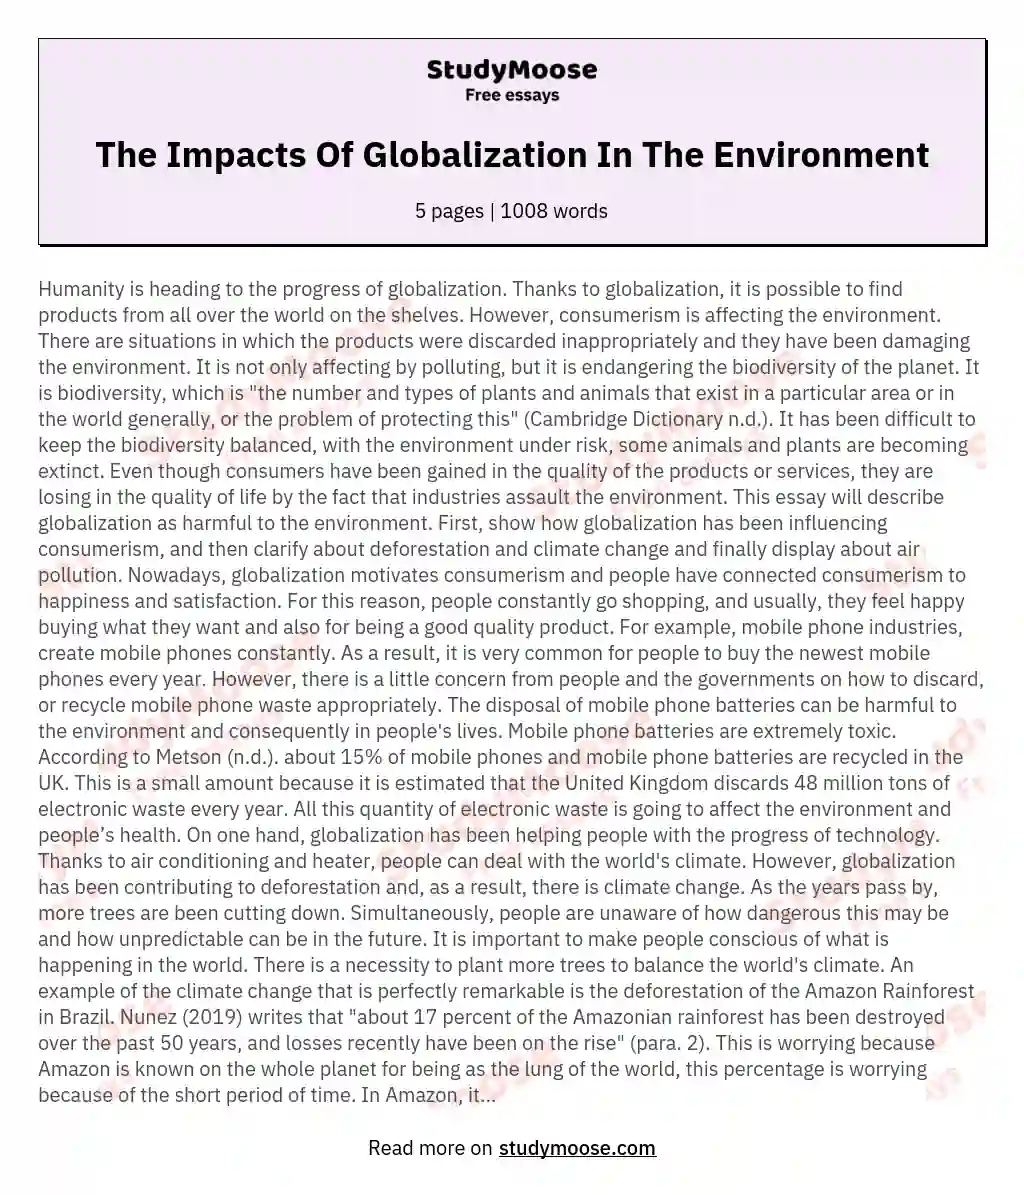 The Impacts Of Globalization In The Environment essay